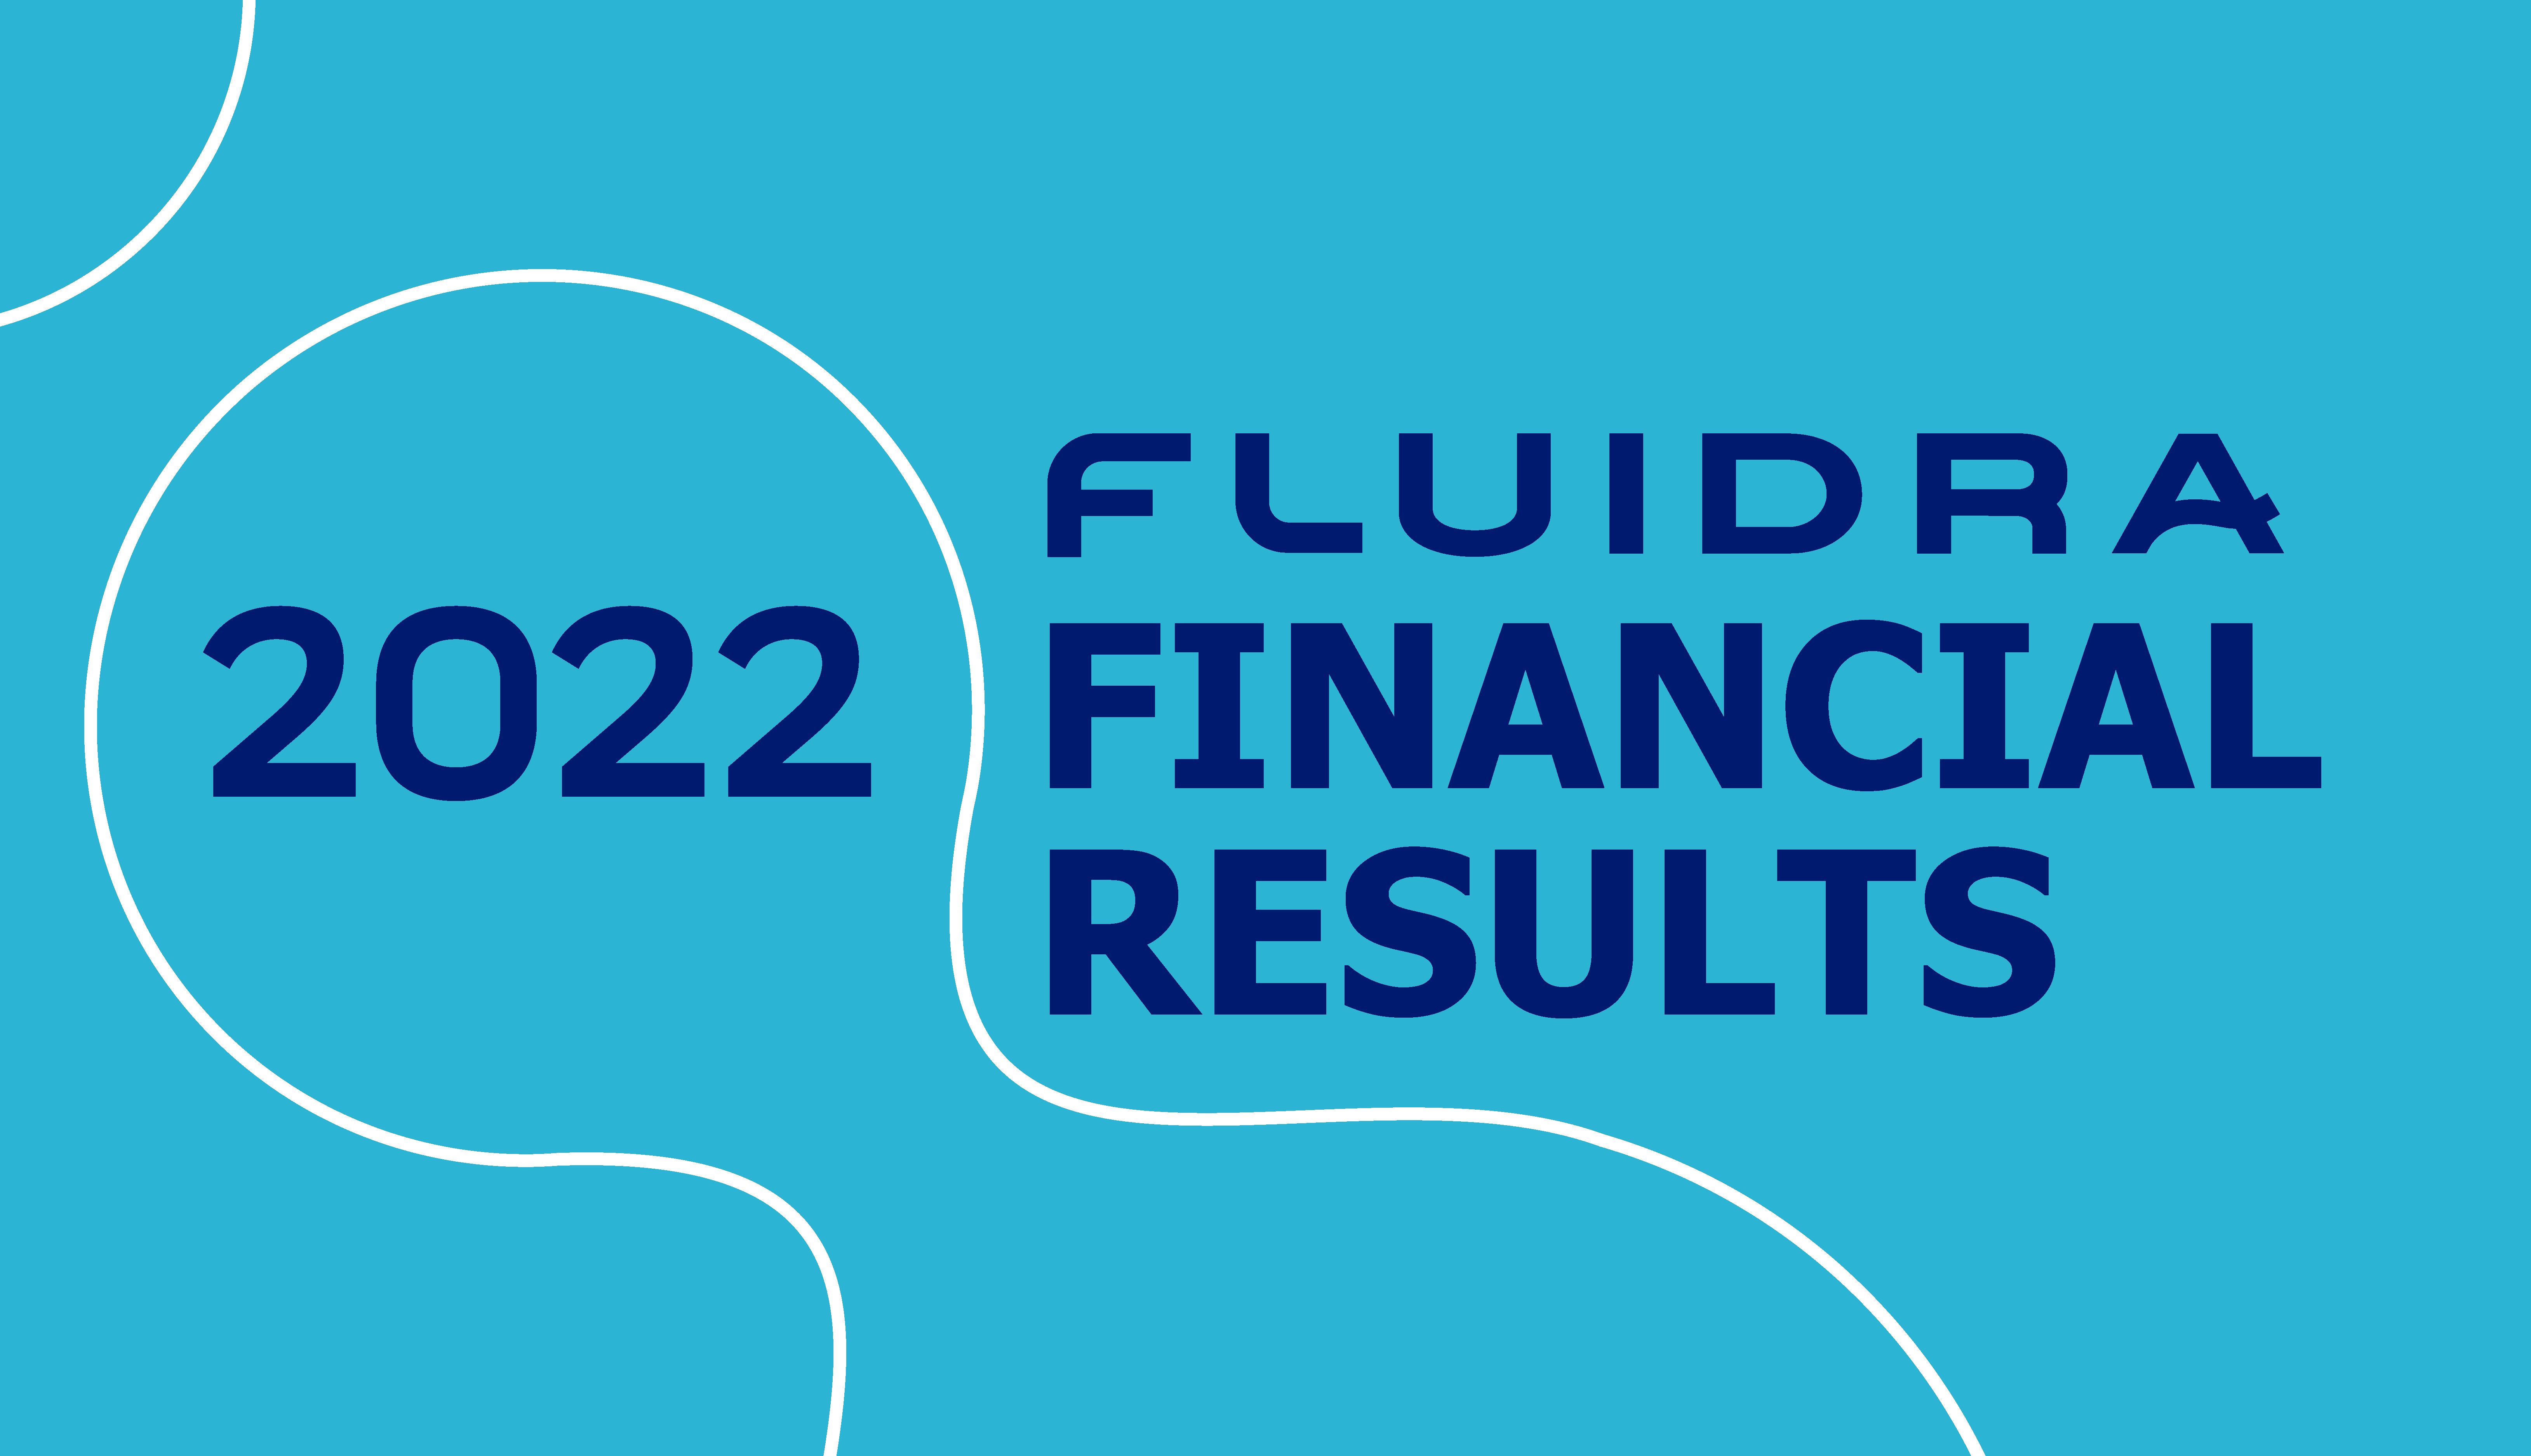 Fluidra closed 2022 with €2,389 million sales, up 9% on 2021